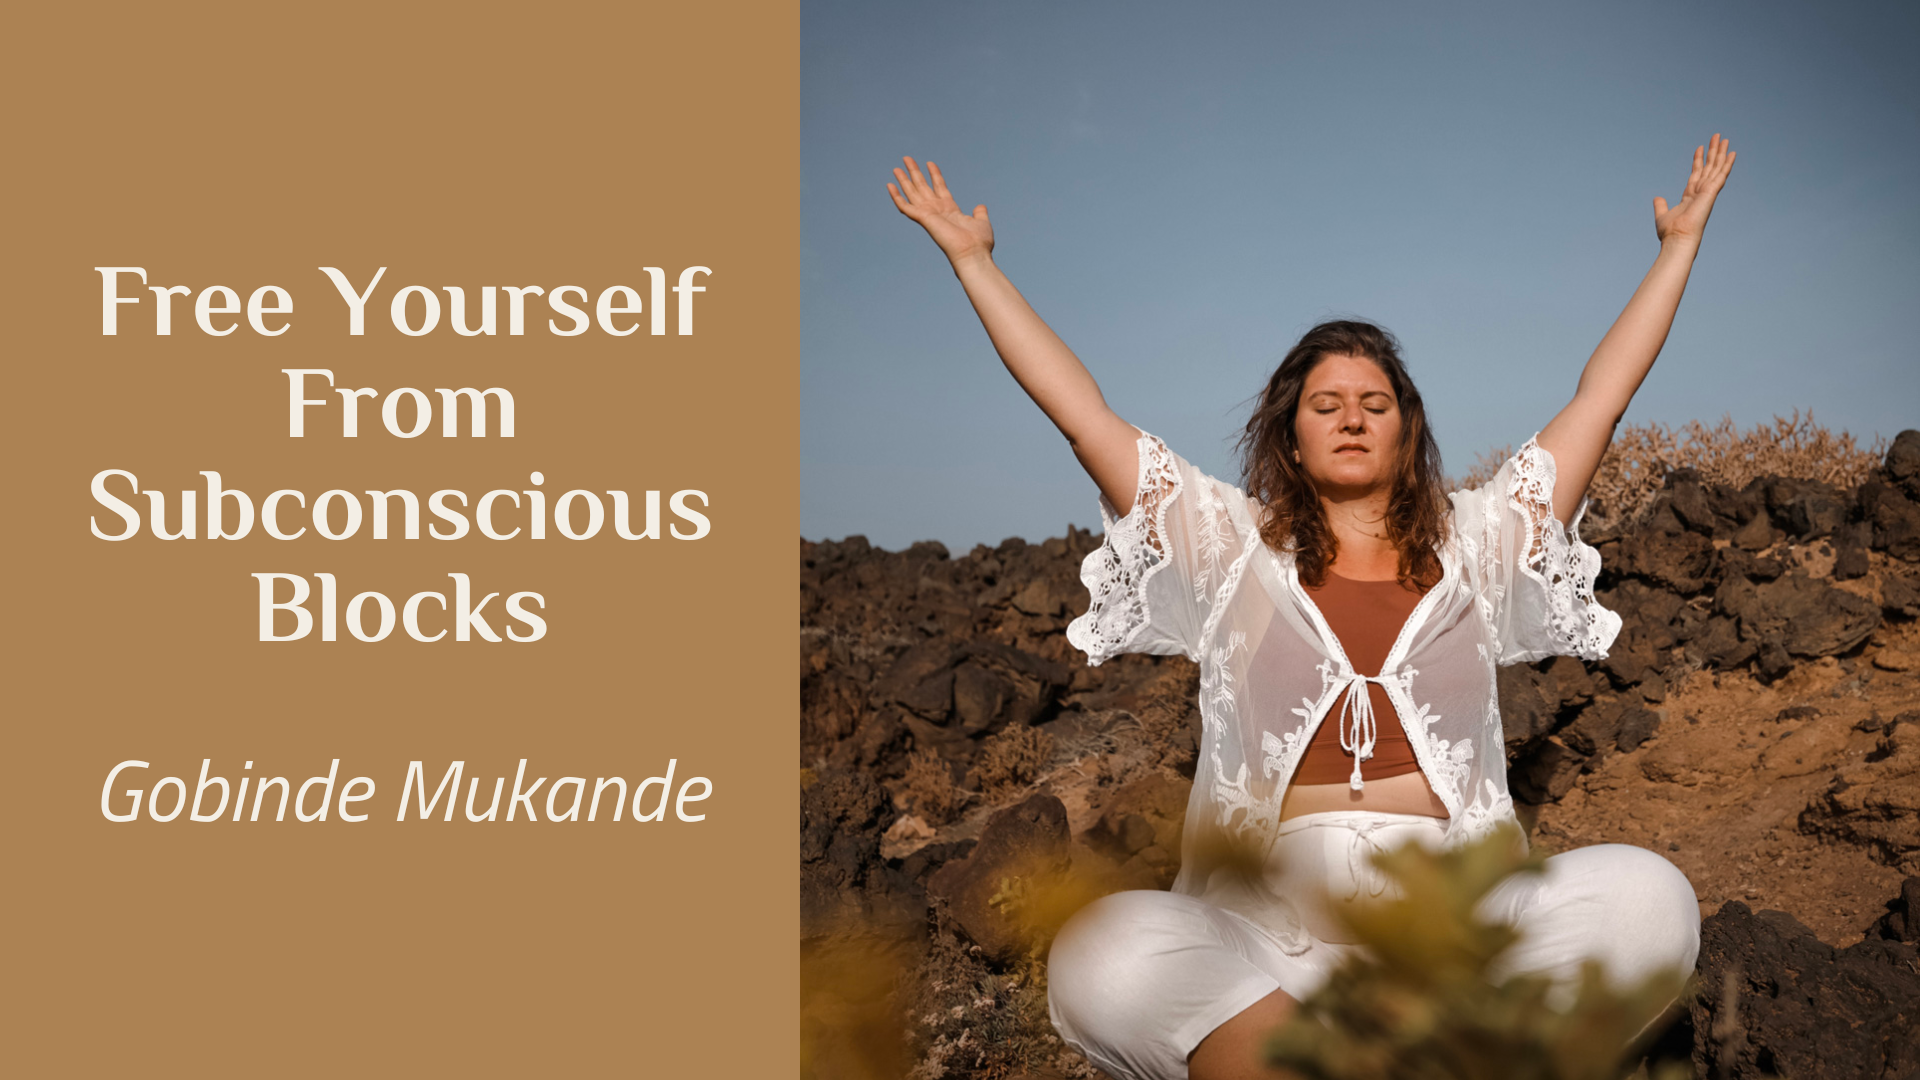 Your Om Sangha - Live Session - Free Yourself from Subconscious Blocks